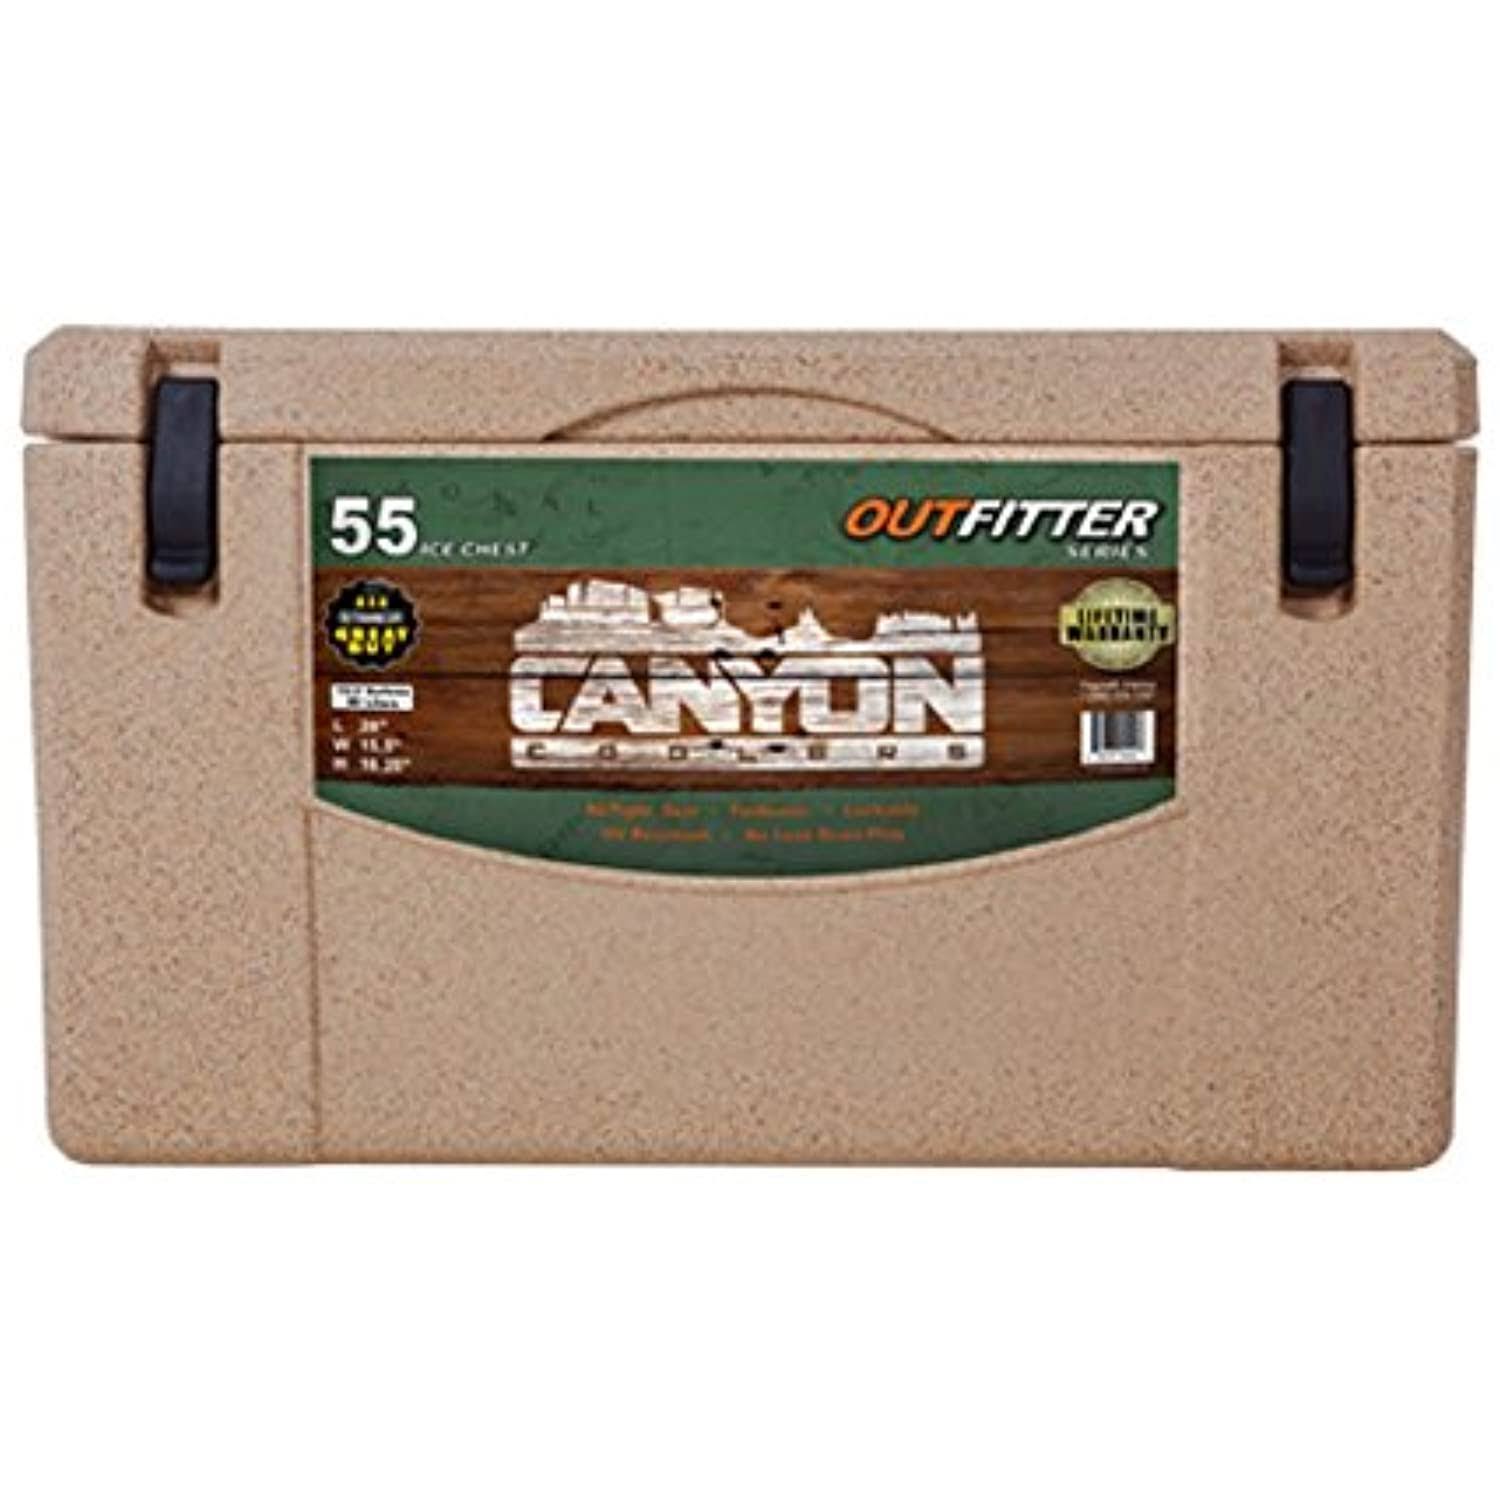 Canyon Coolers Outfitter Rotomolded Cooler - Sandstone, 55 Quart